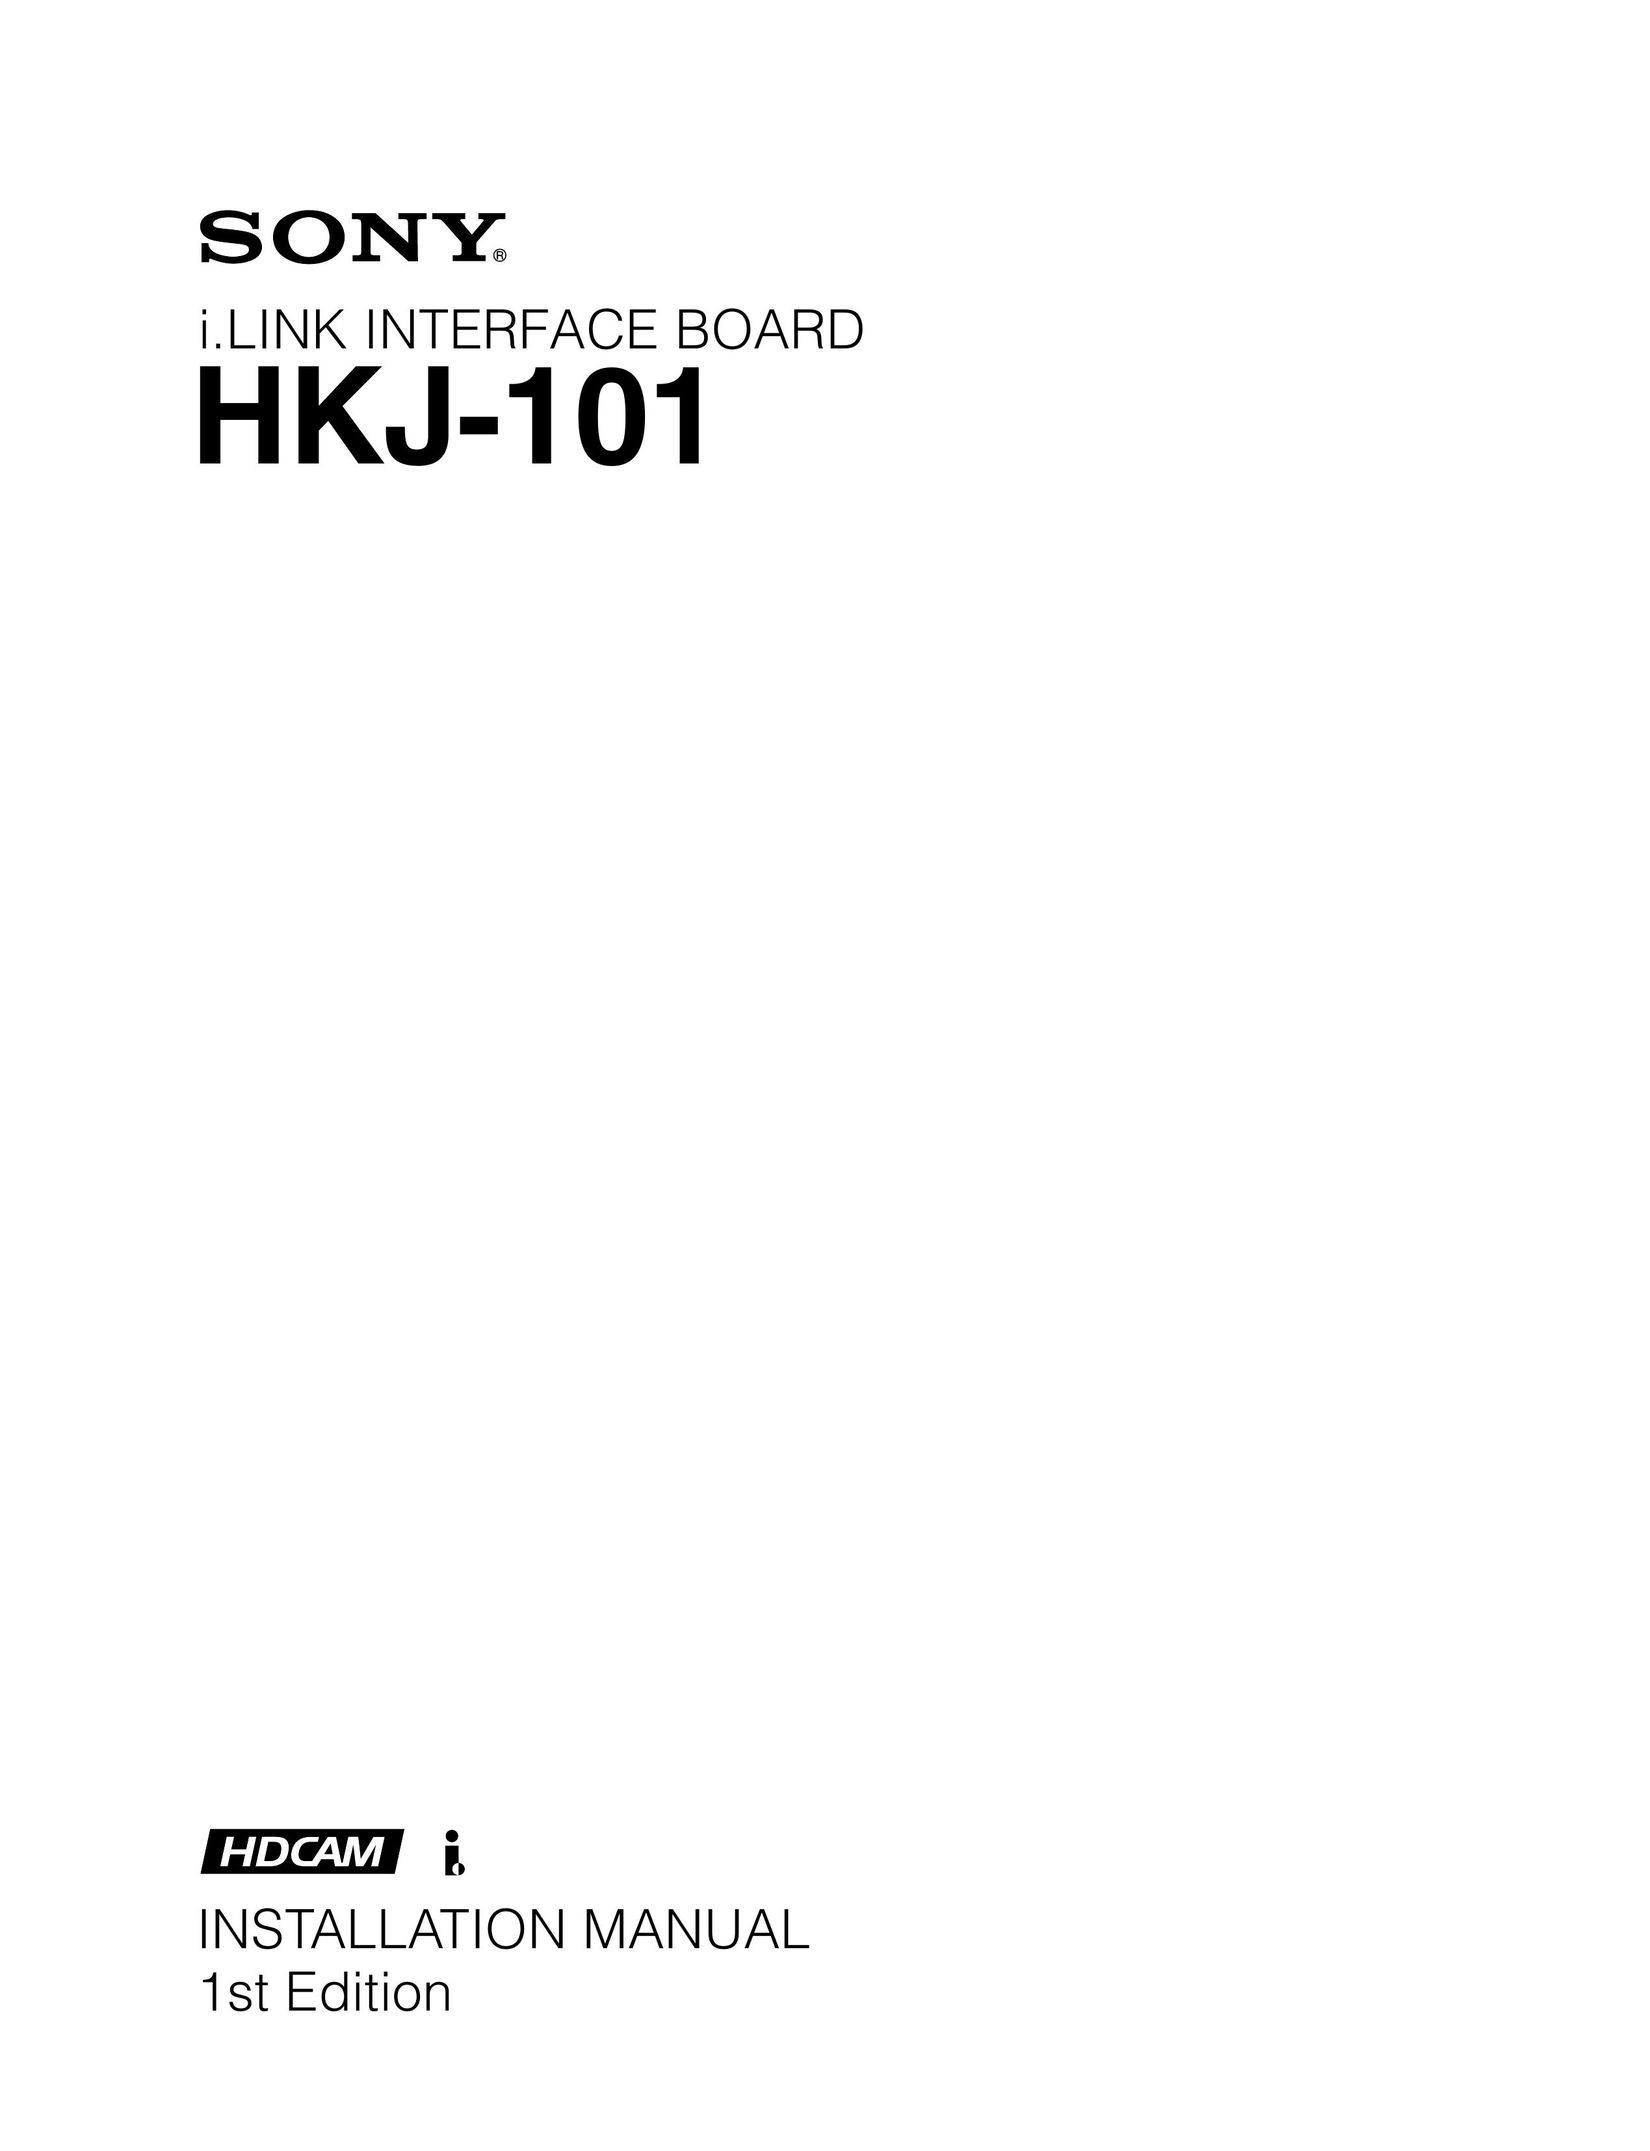 Sony HKJ-101 Network Router User Manual